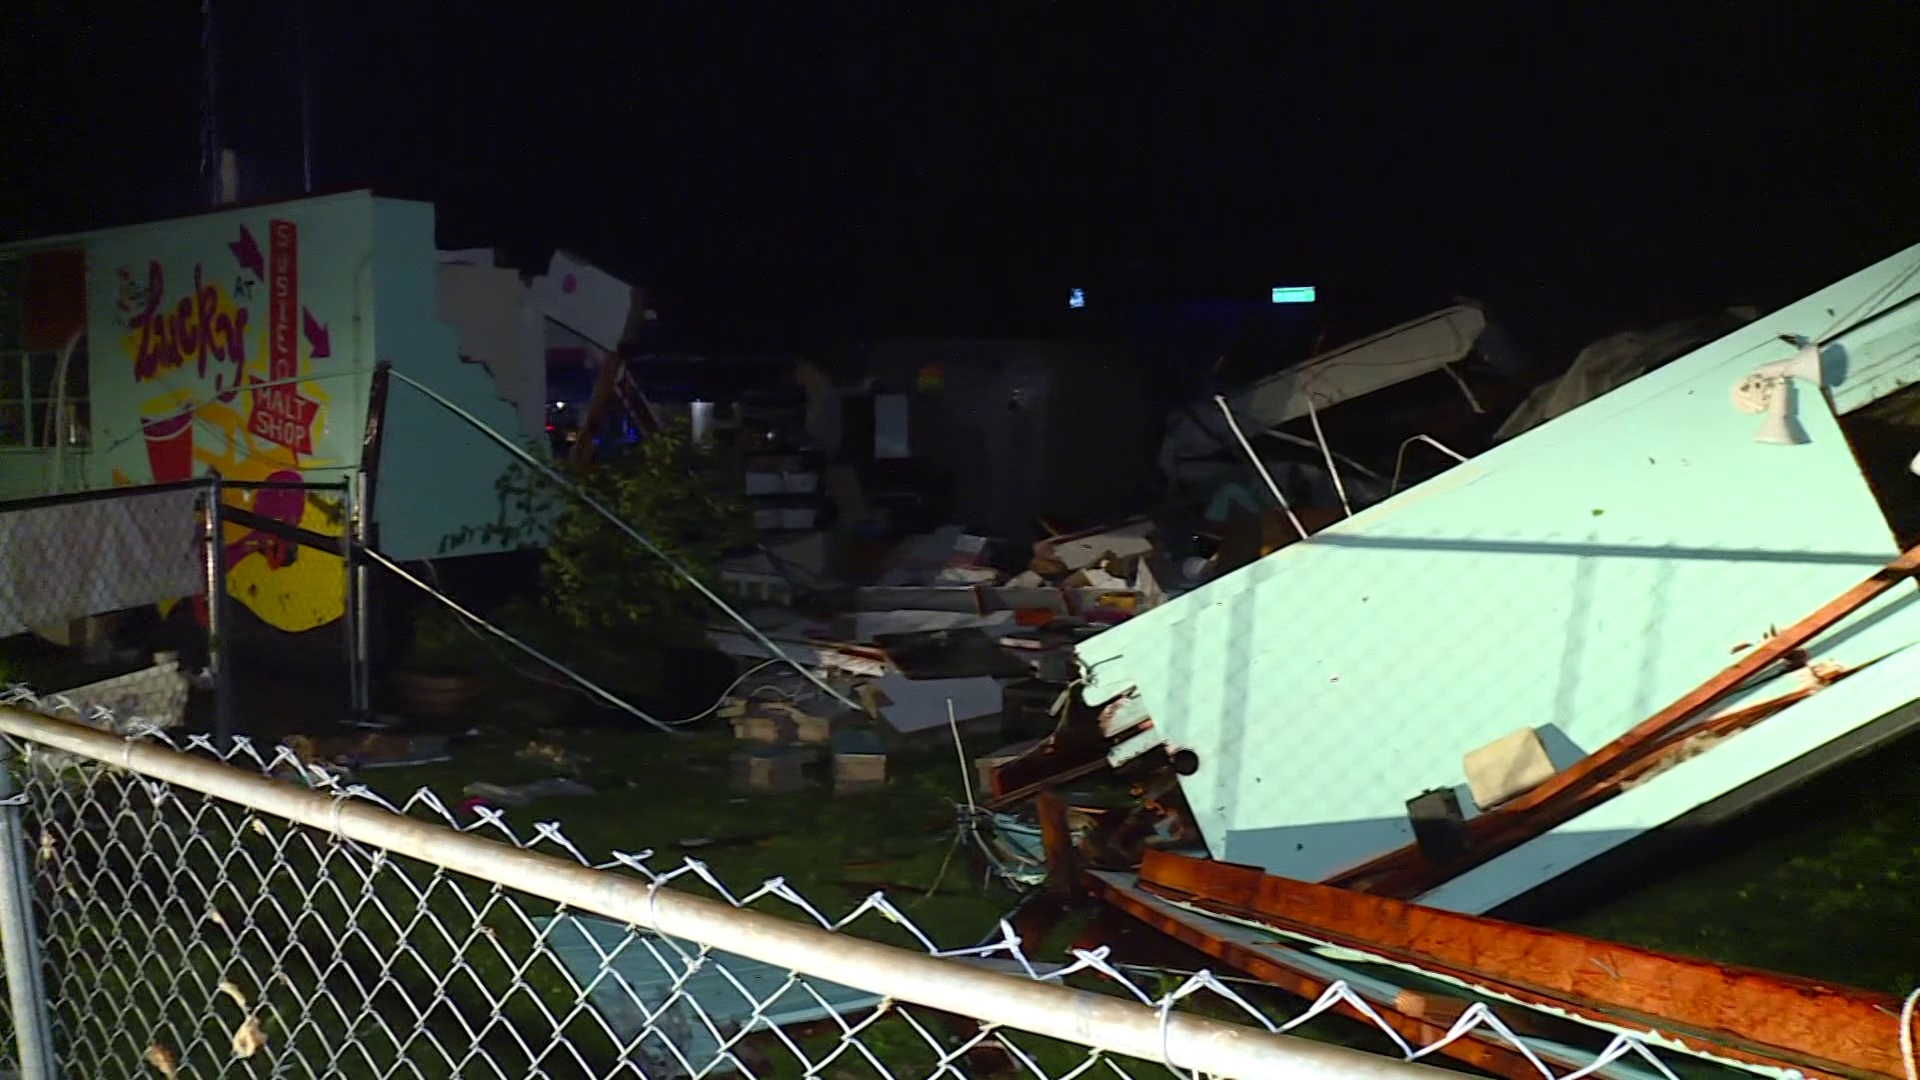 Photos Damage in Benton County after overnight tornadoes